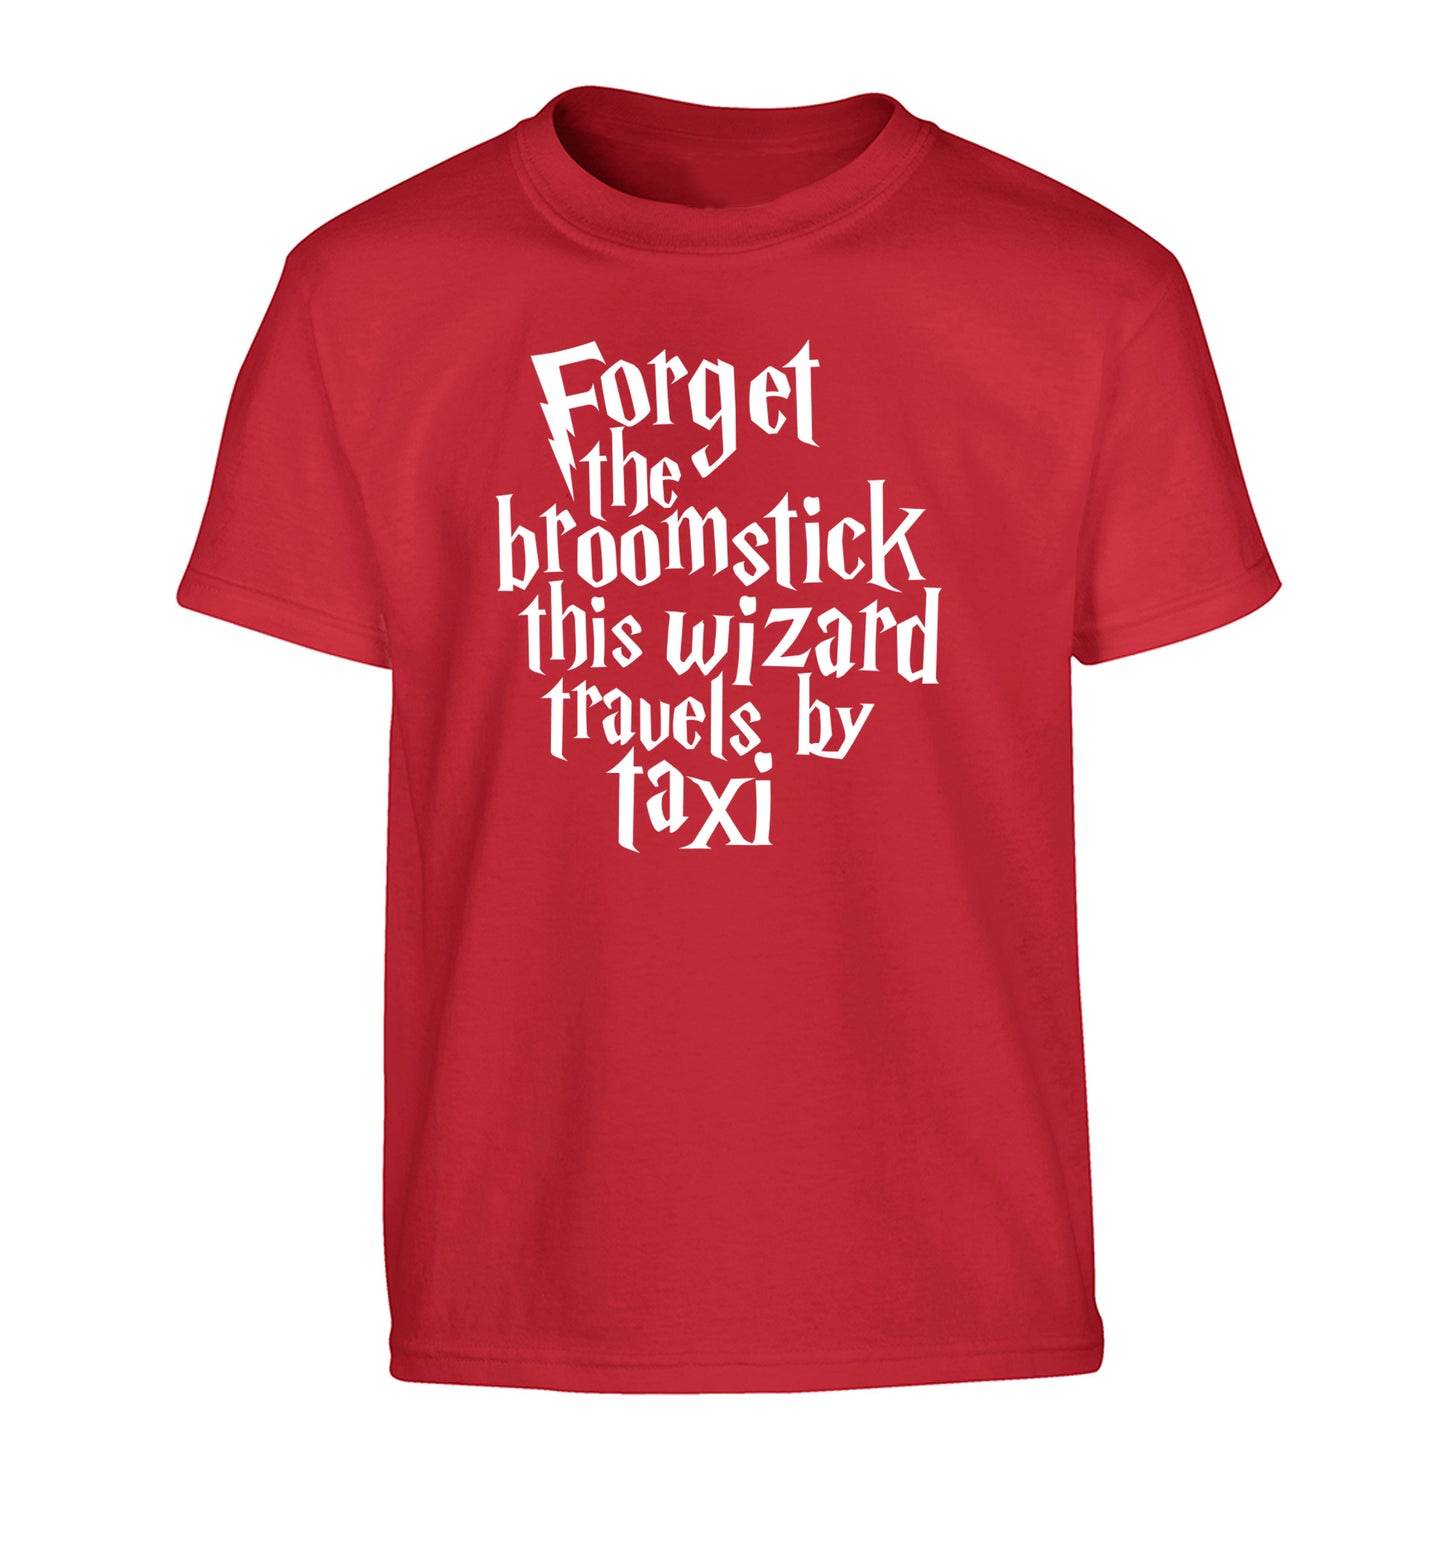 Forget the broomstick this wizard travels by taxi Children's red Tshirt 12-14 Years